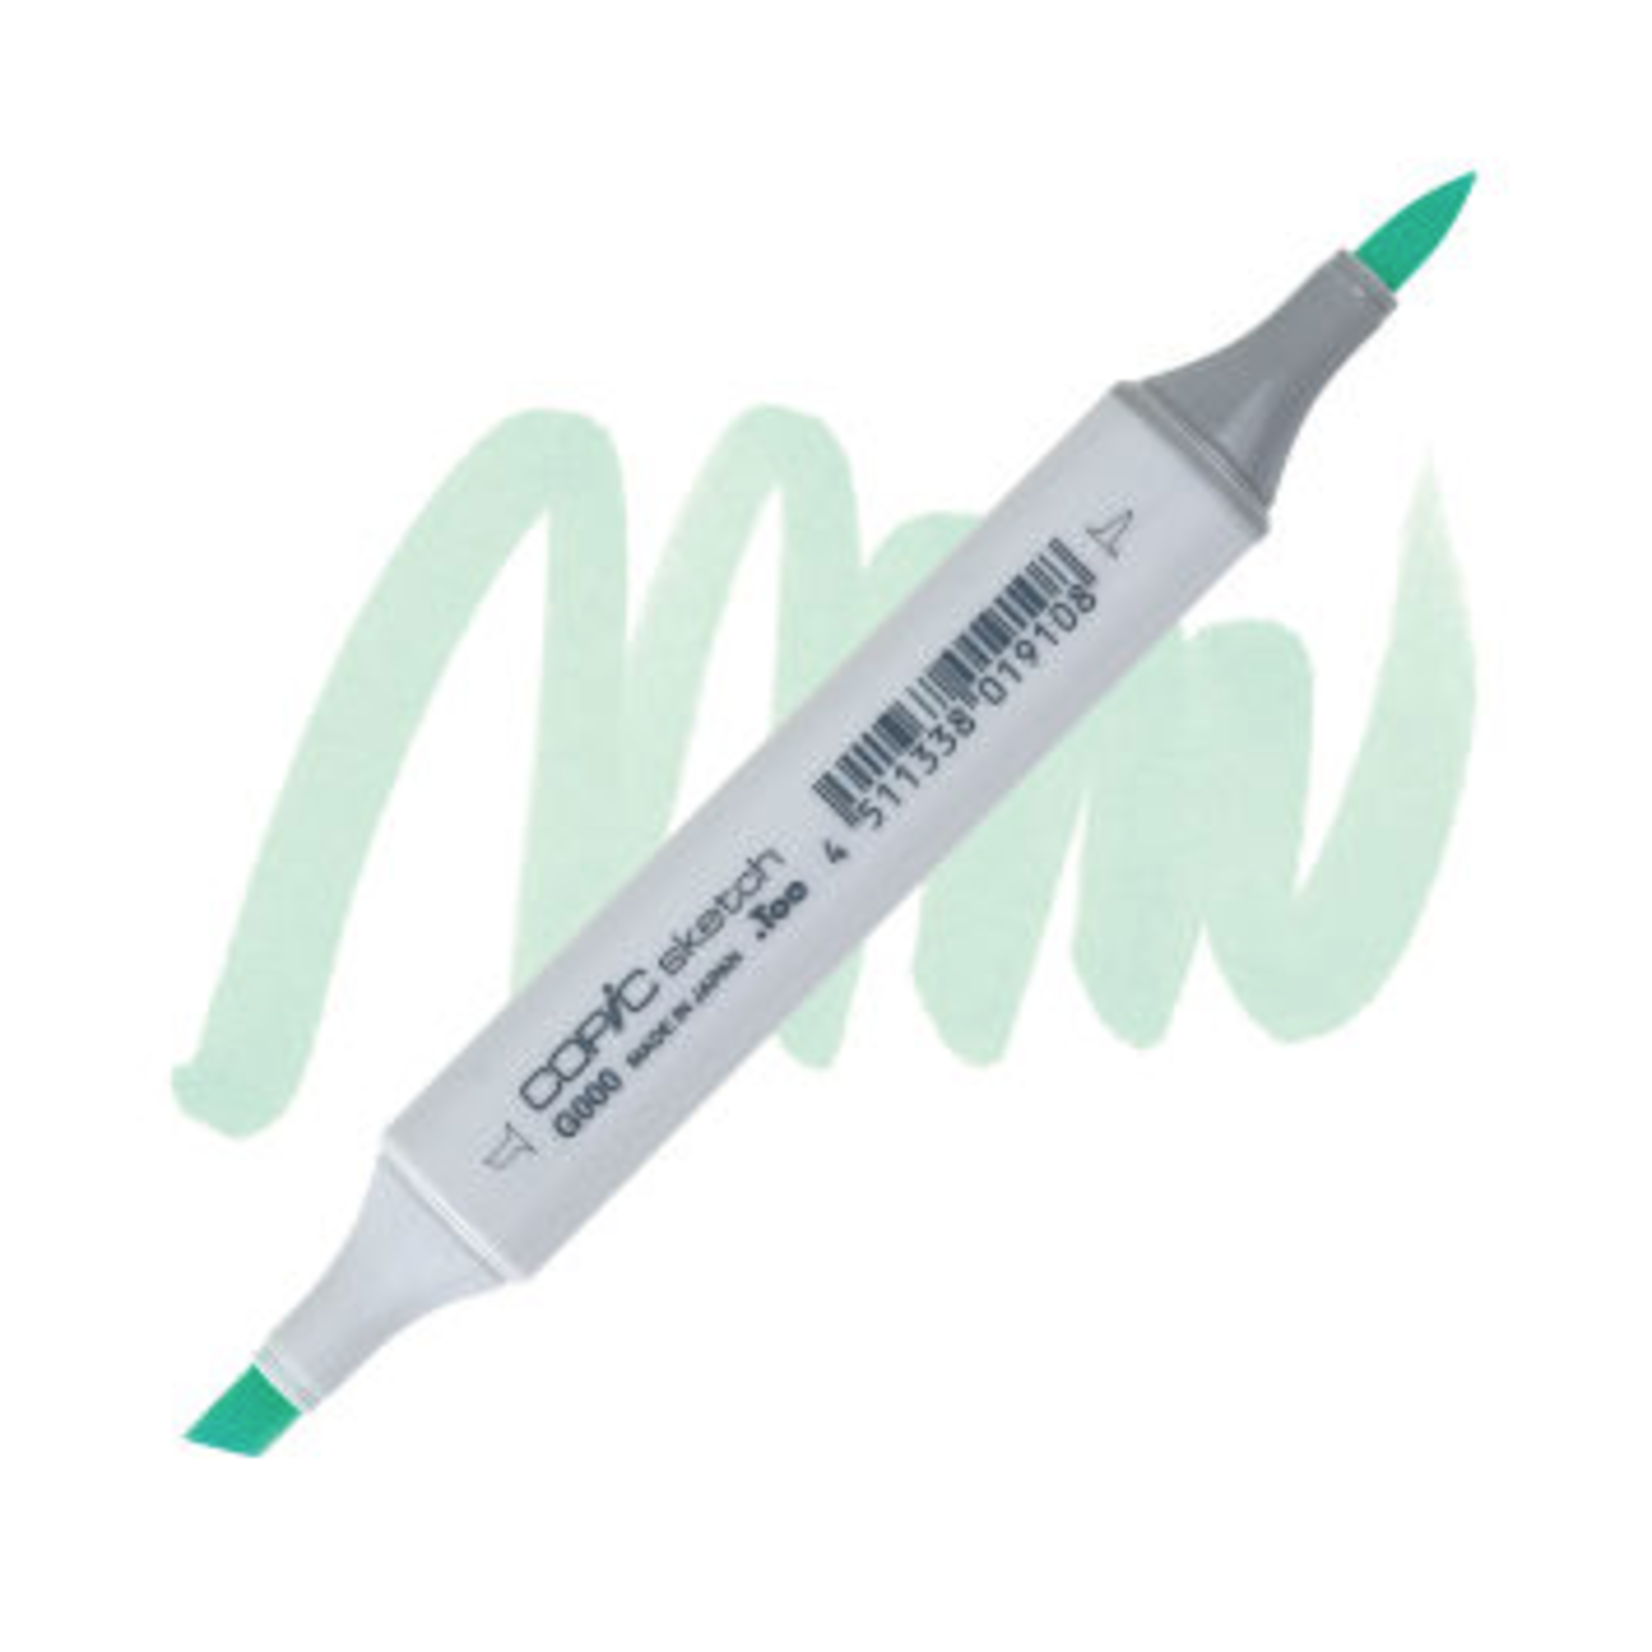 Copic Copic Sketch Yg41 - Pale Green